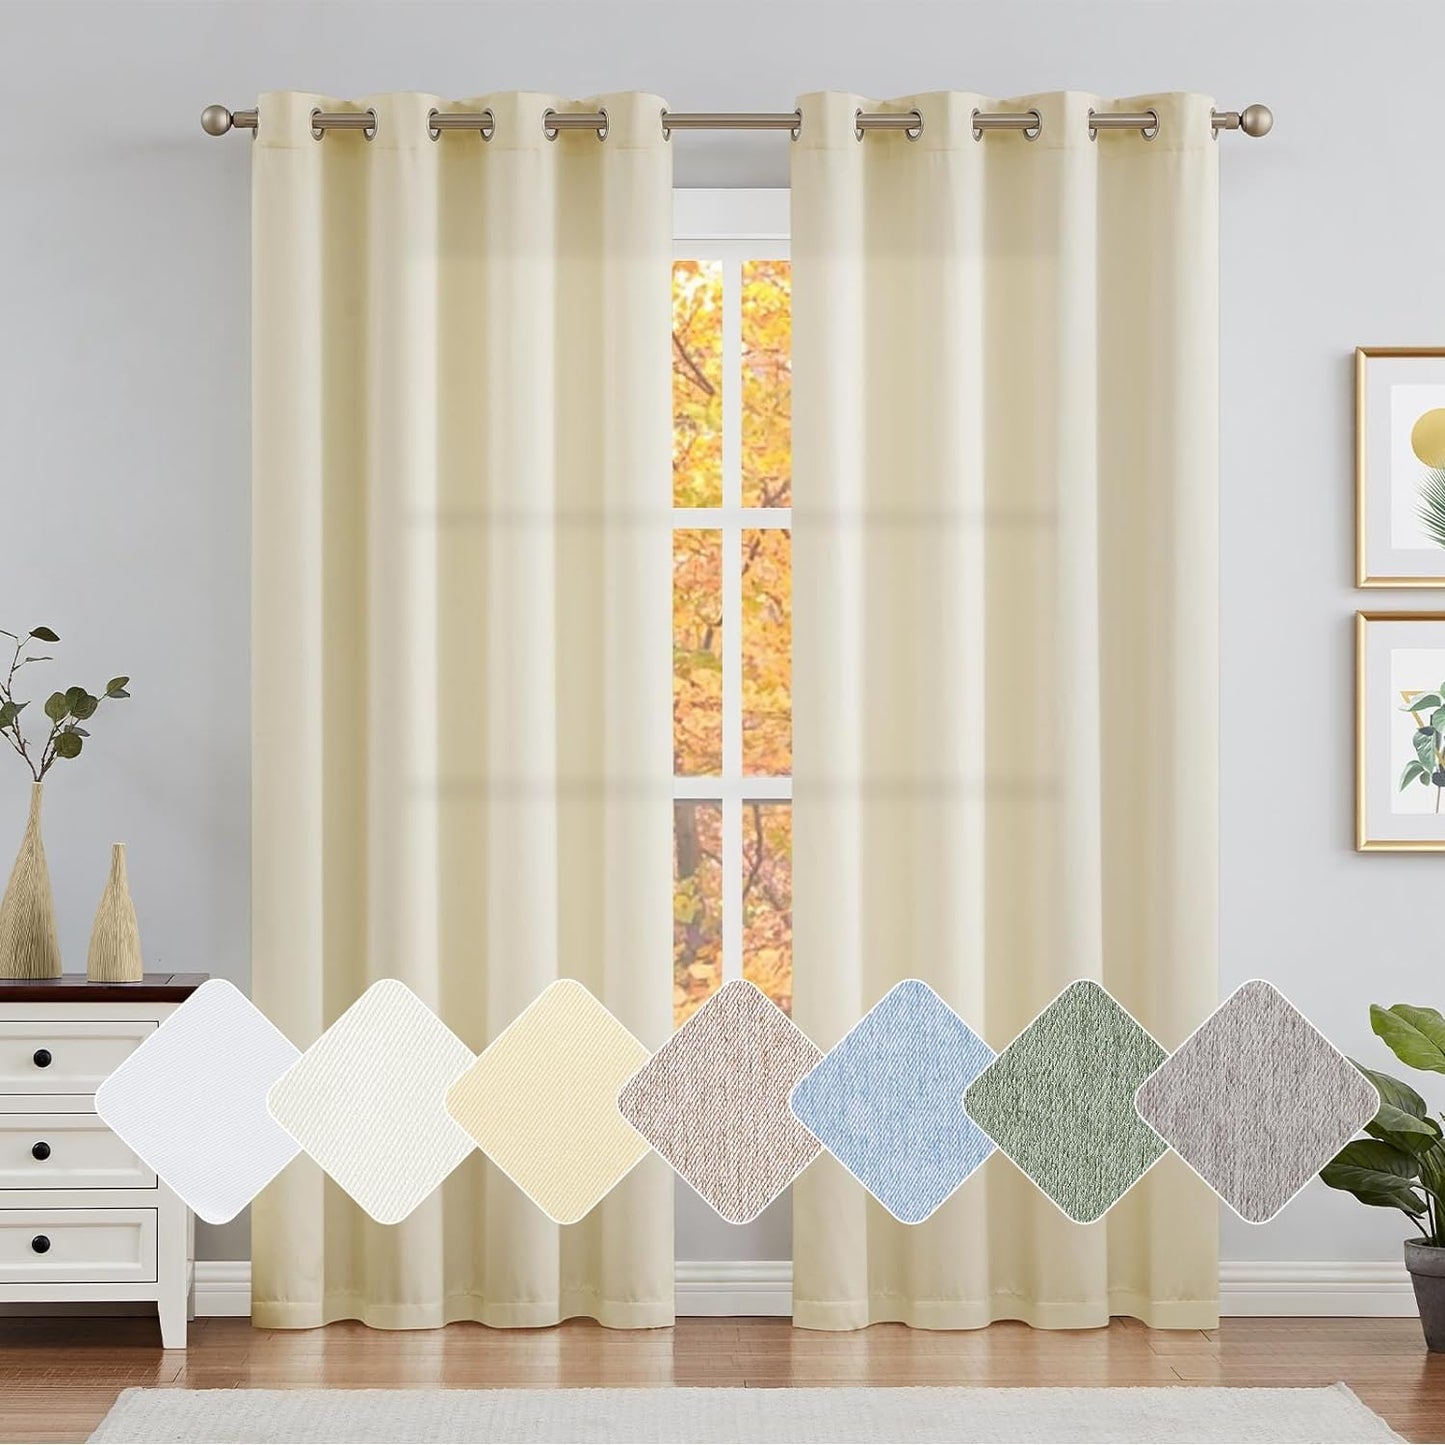 Jinchan Curtains for Bedroom Living Room 84 Inch Long Room Darkening Farmhouse Country Window Curtains Heathered Denim Blue Curtains Grommet Curtains Drapes 2 Panels  CKNY HOME FASHION *Beige 50"W X 84"L 